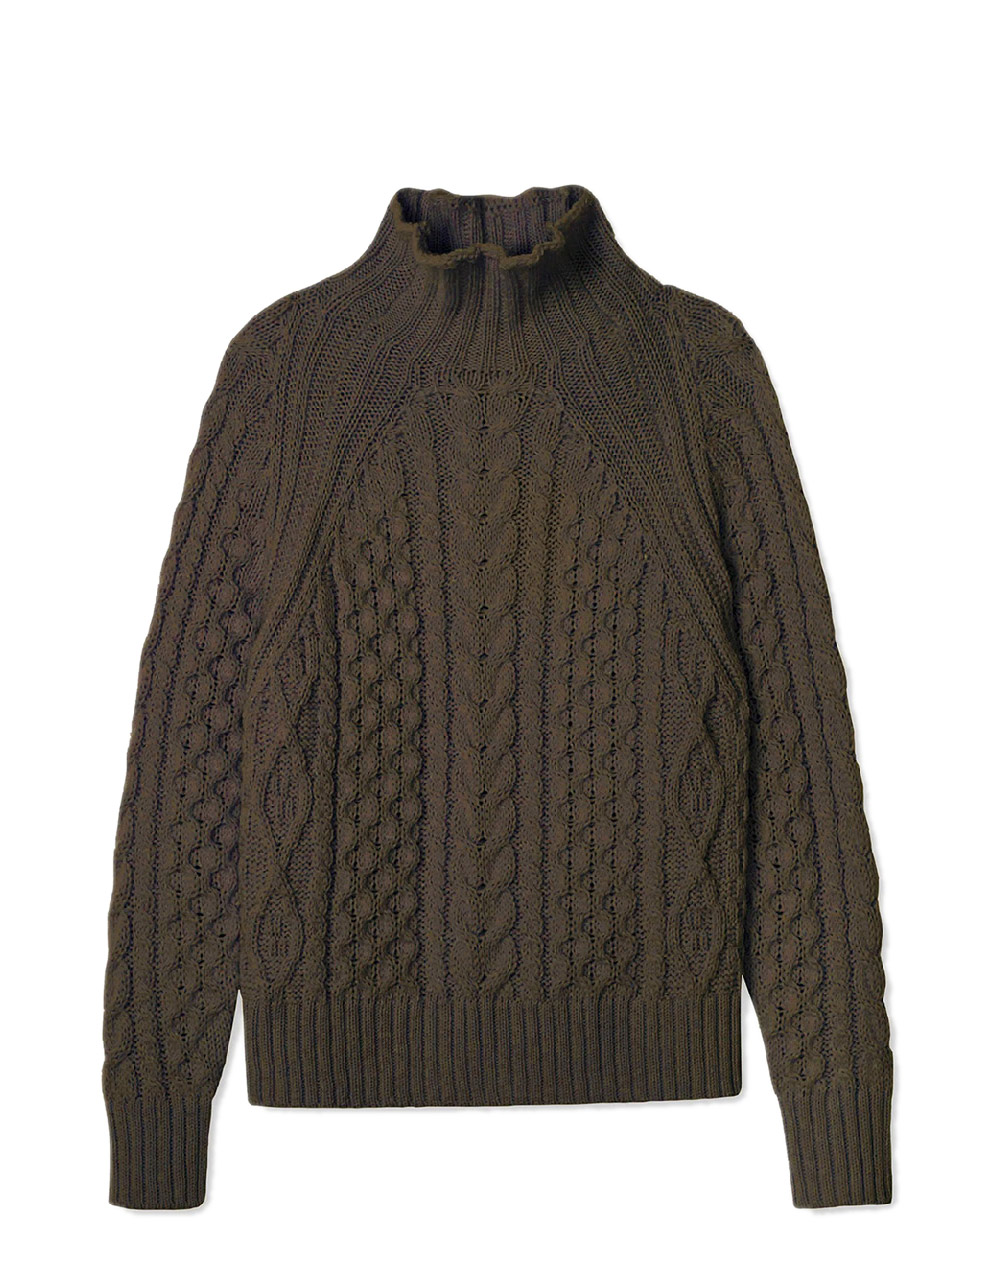 PEREGRINE – Sophie Cable Jumper